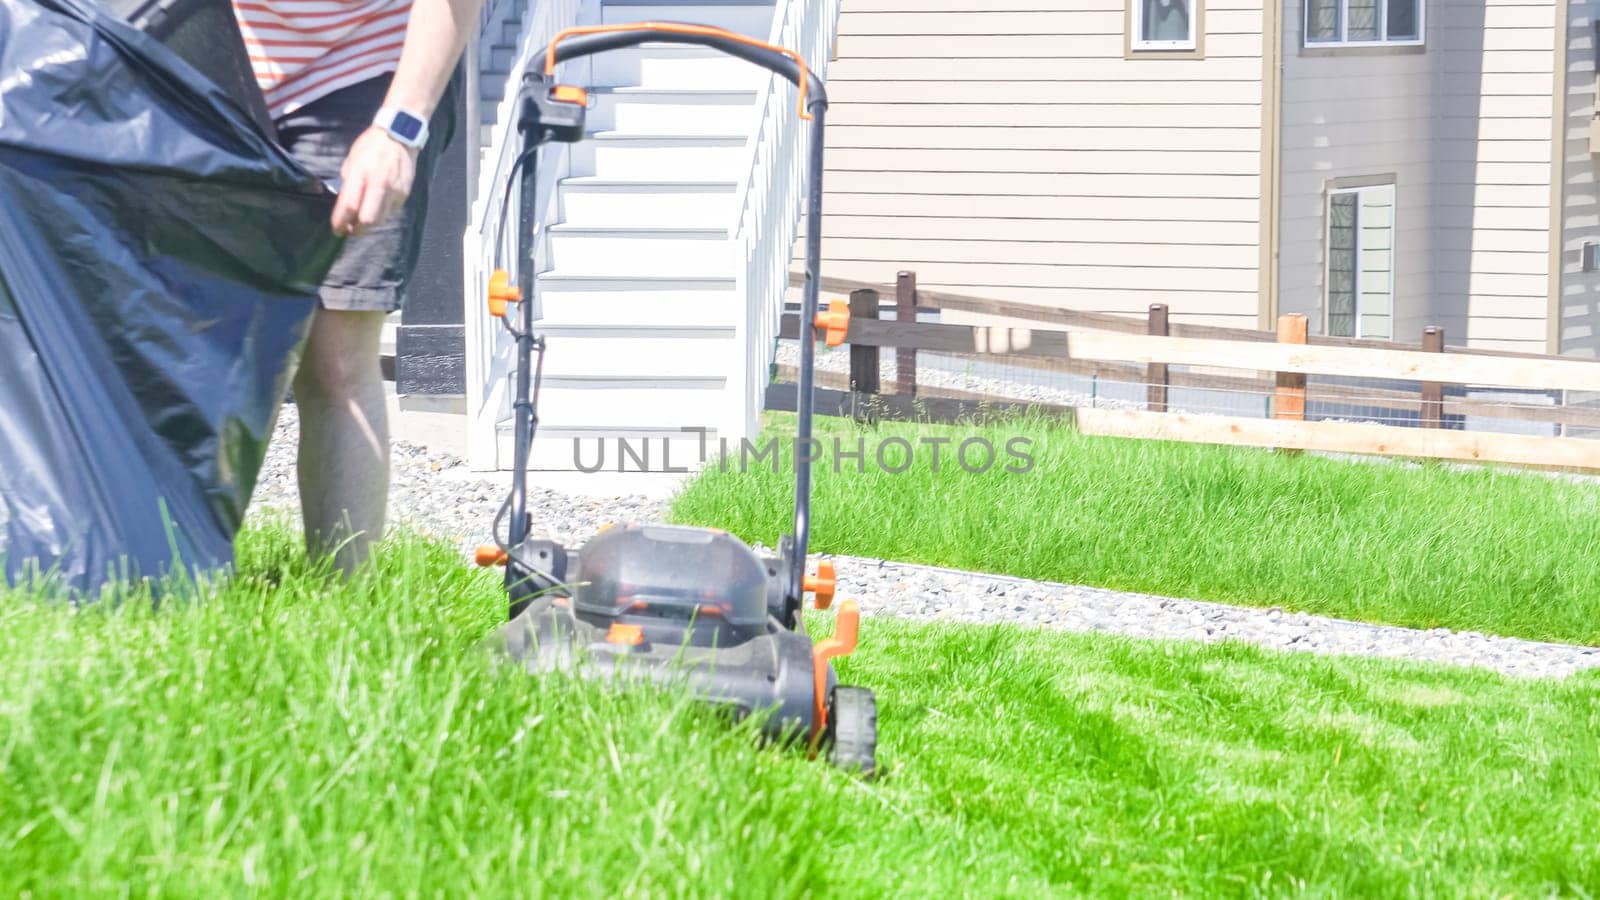 At a residential suburban house, a lush green lawn is meticulously mowed using an electric lawn mower, creating a well-manicured and inviting outdoor space.